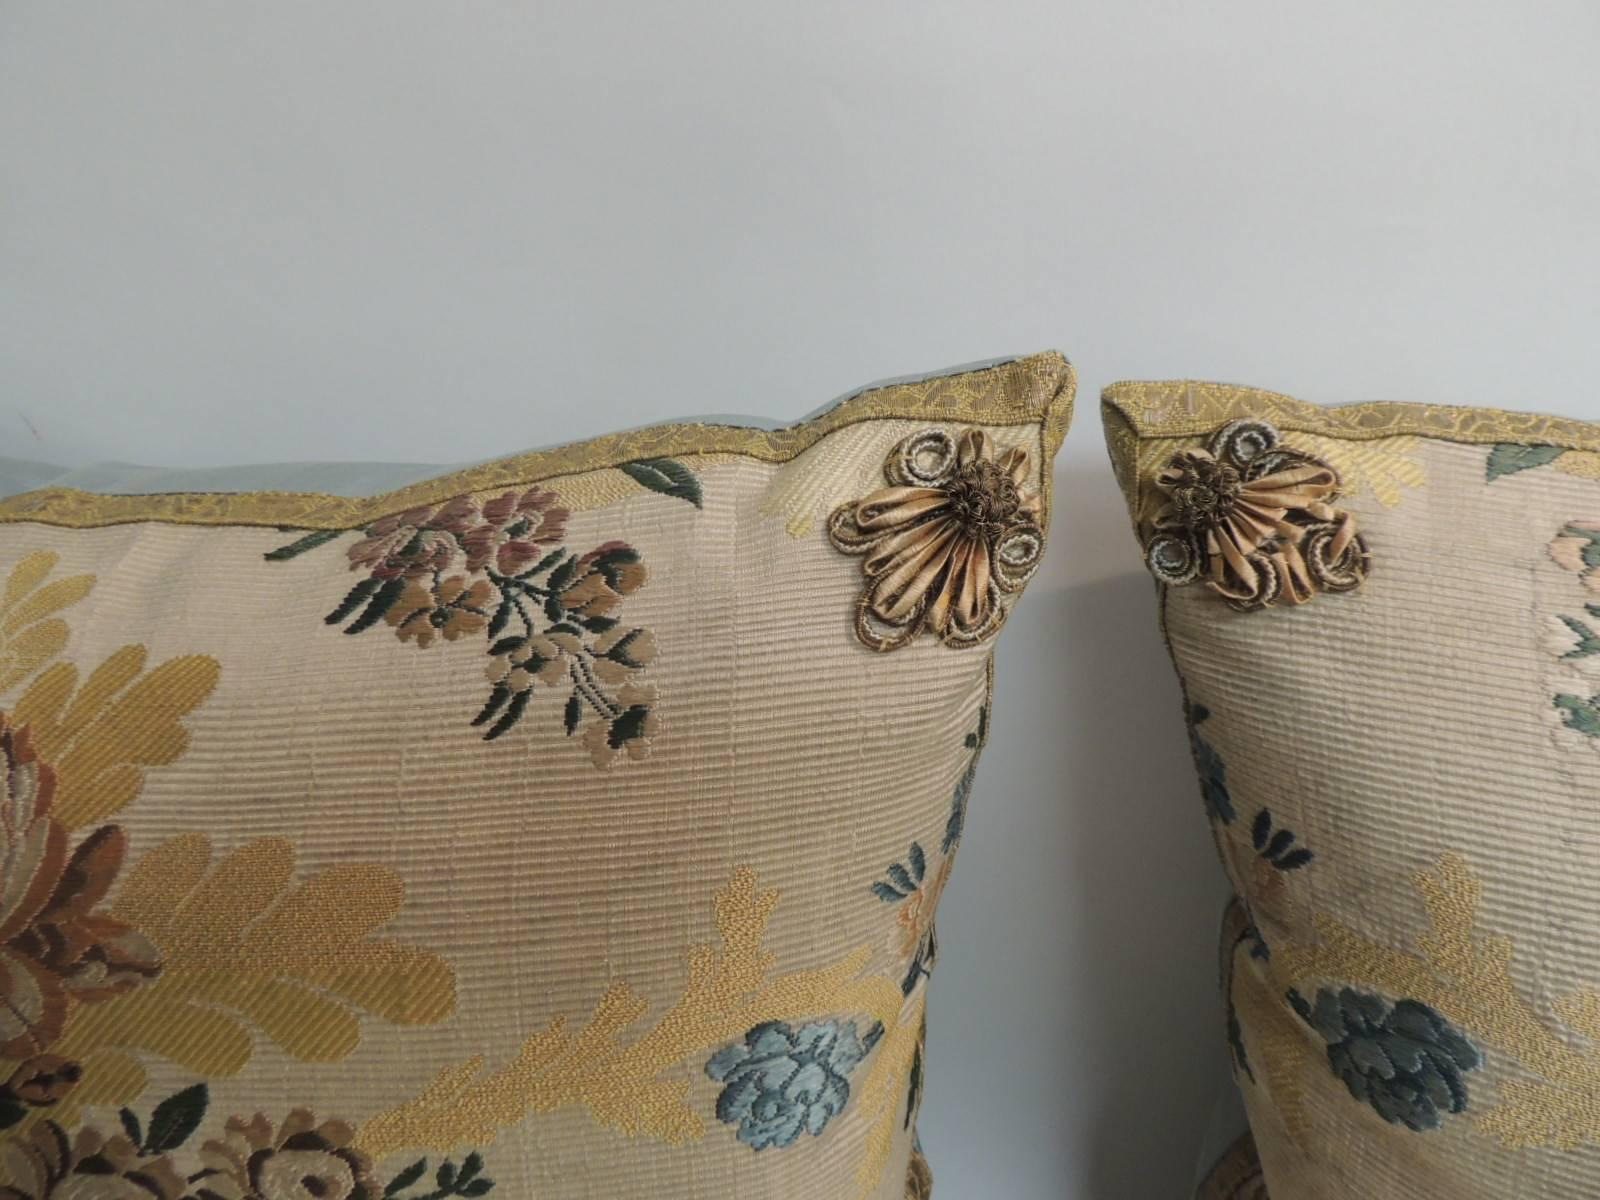 Pair of 19th century French silk Brocade in yellow and blue antique textile decorative pillows.
Embellished with gold metallic rosettes on each of the four corners and finished with soft blue silk backings. Antique textile decorative pillows